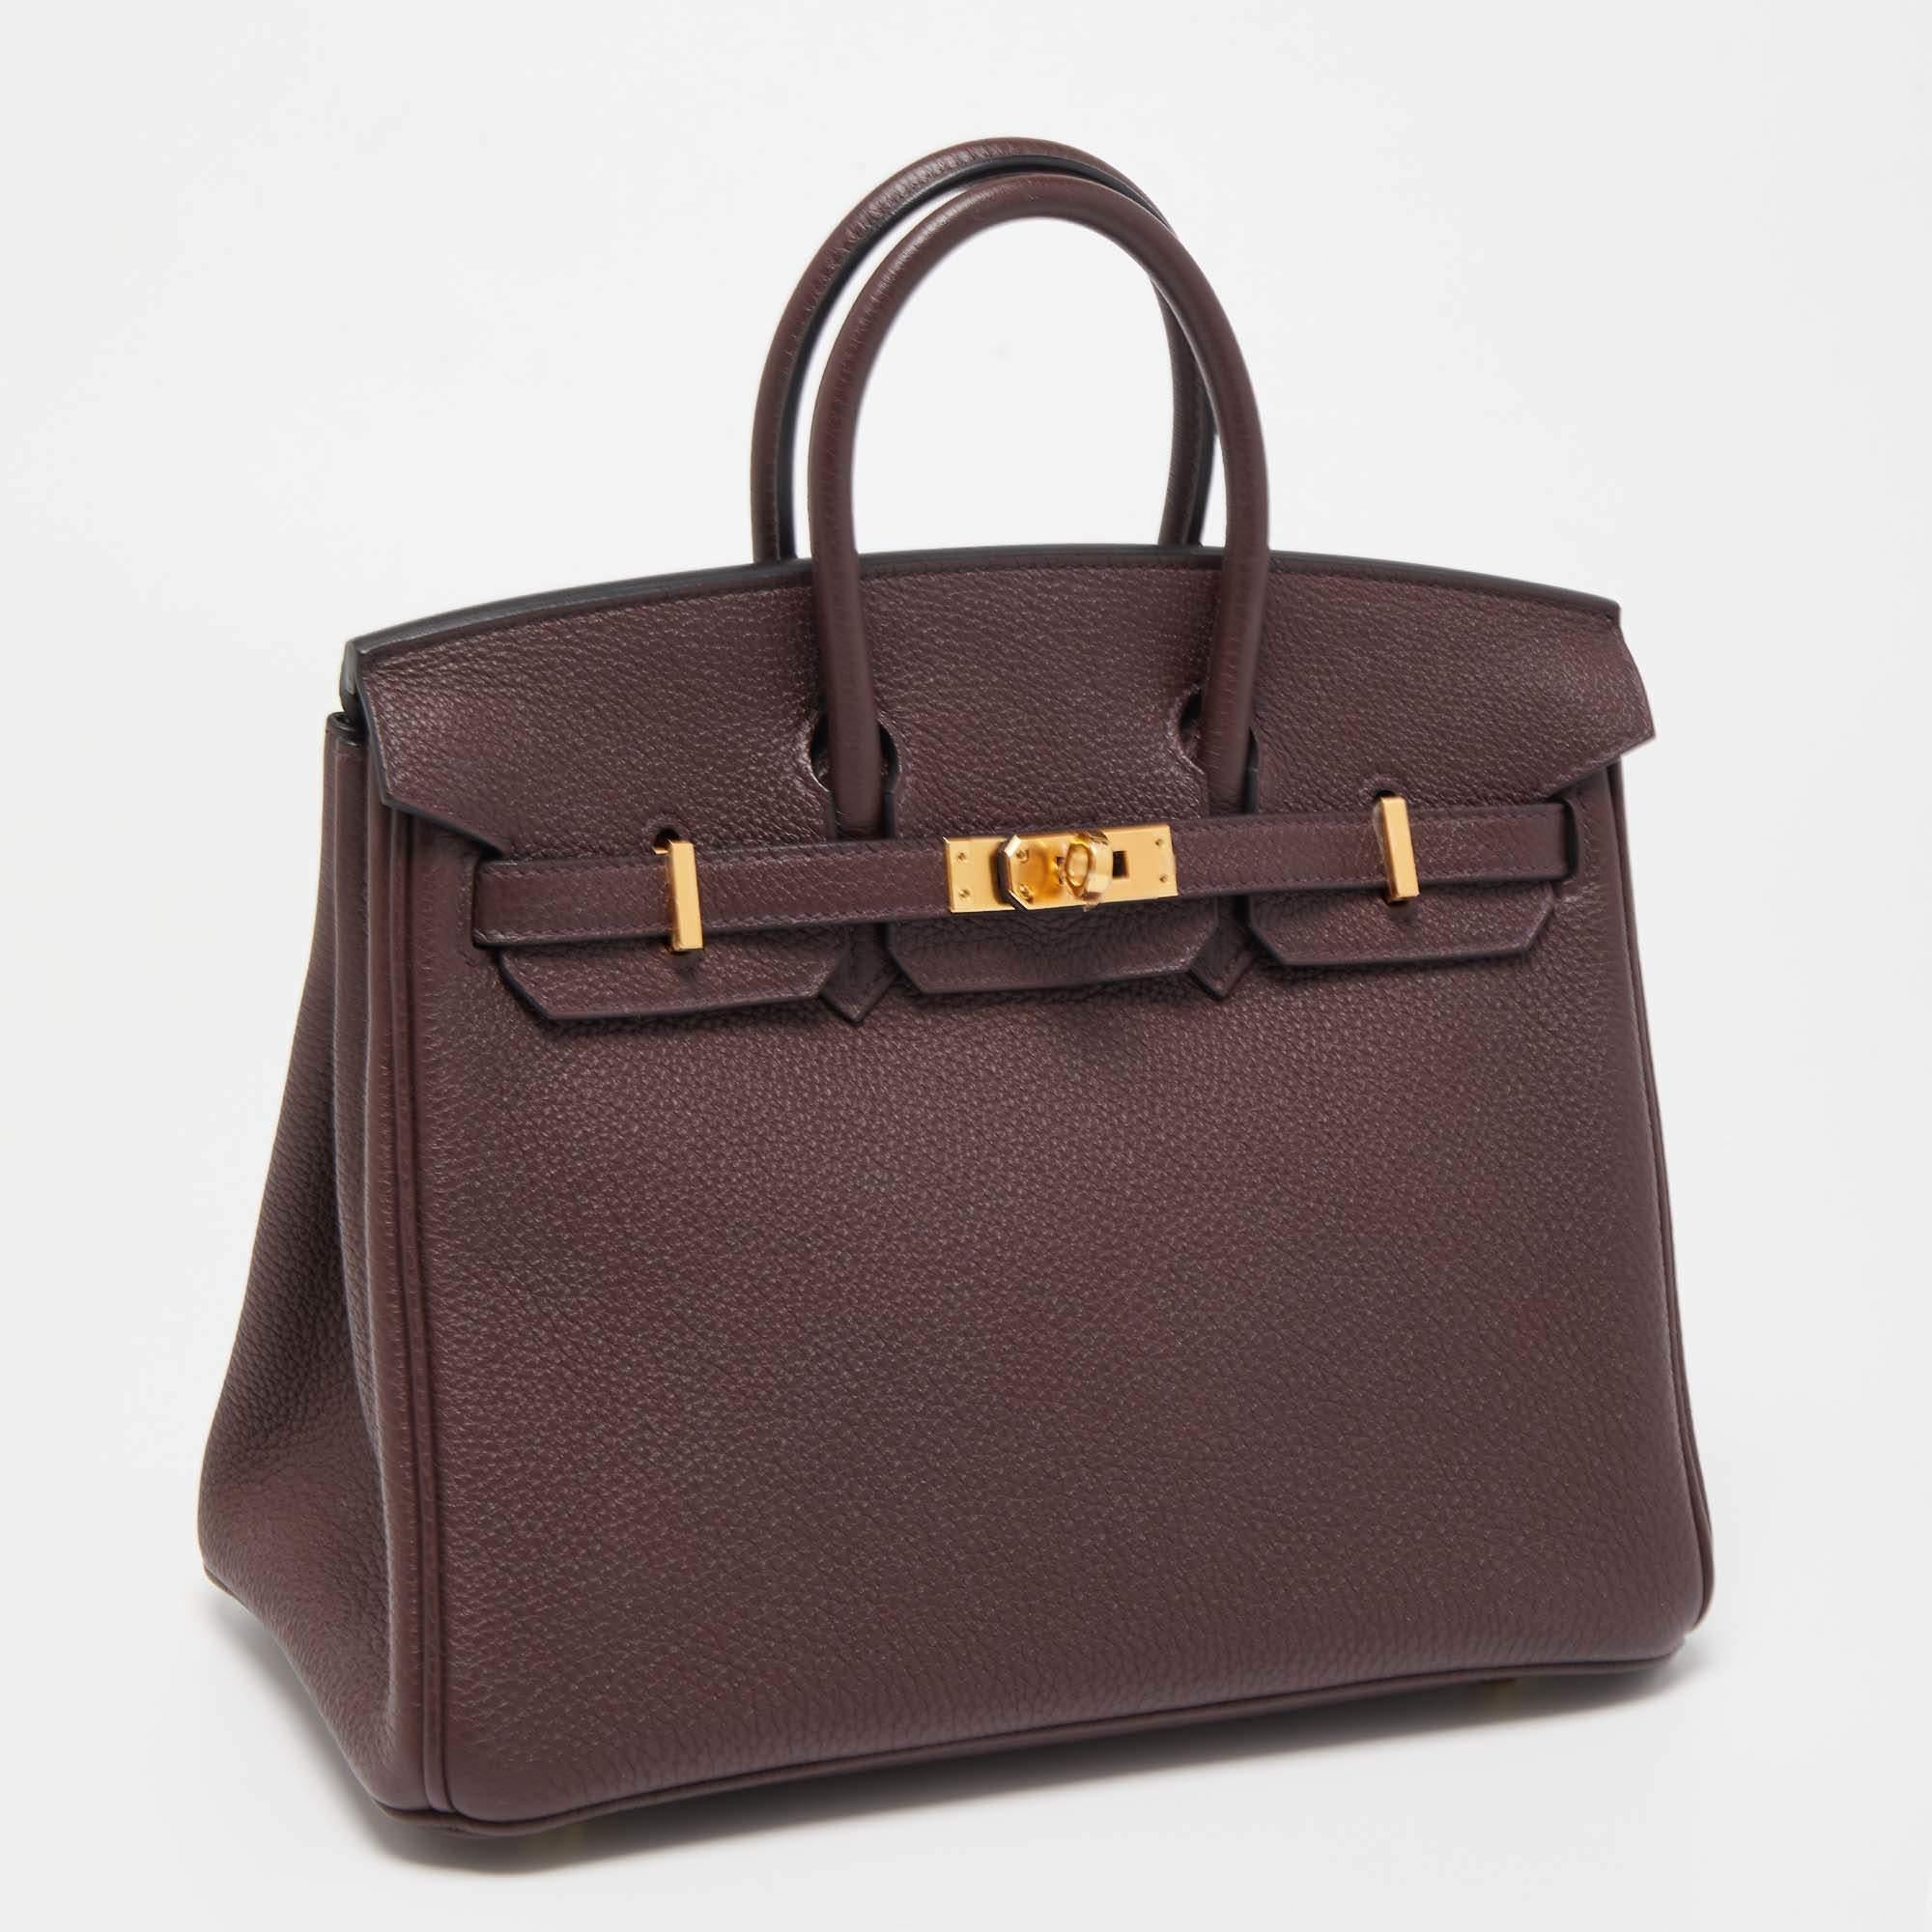 If you've been wishing to own an authentic Birkin, there is no better time to buy this coveted work of art than now. Here, we have this Birkin 25 just for you. Crafted in France from Togo leather, the bag features dual top handles. In addition, the